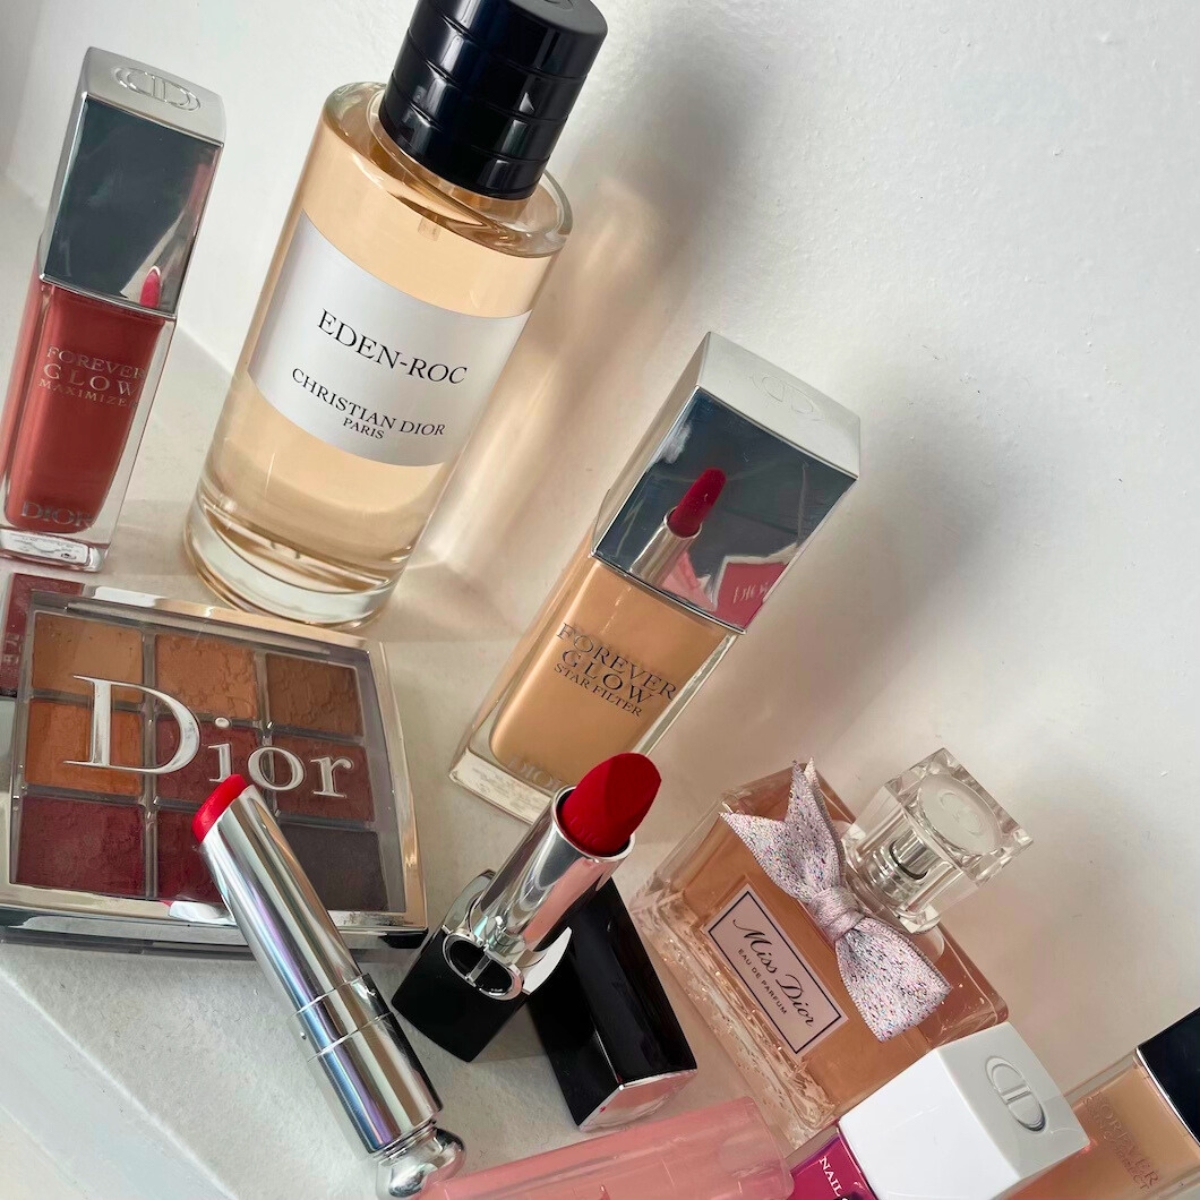  As a beauty editor, I’d pick Dior over all other luxury brands—these 10 products are the reasons why 